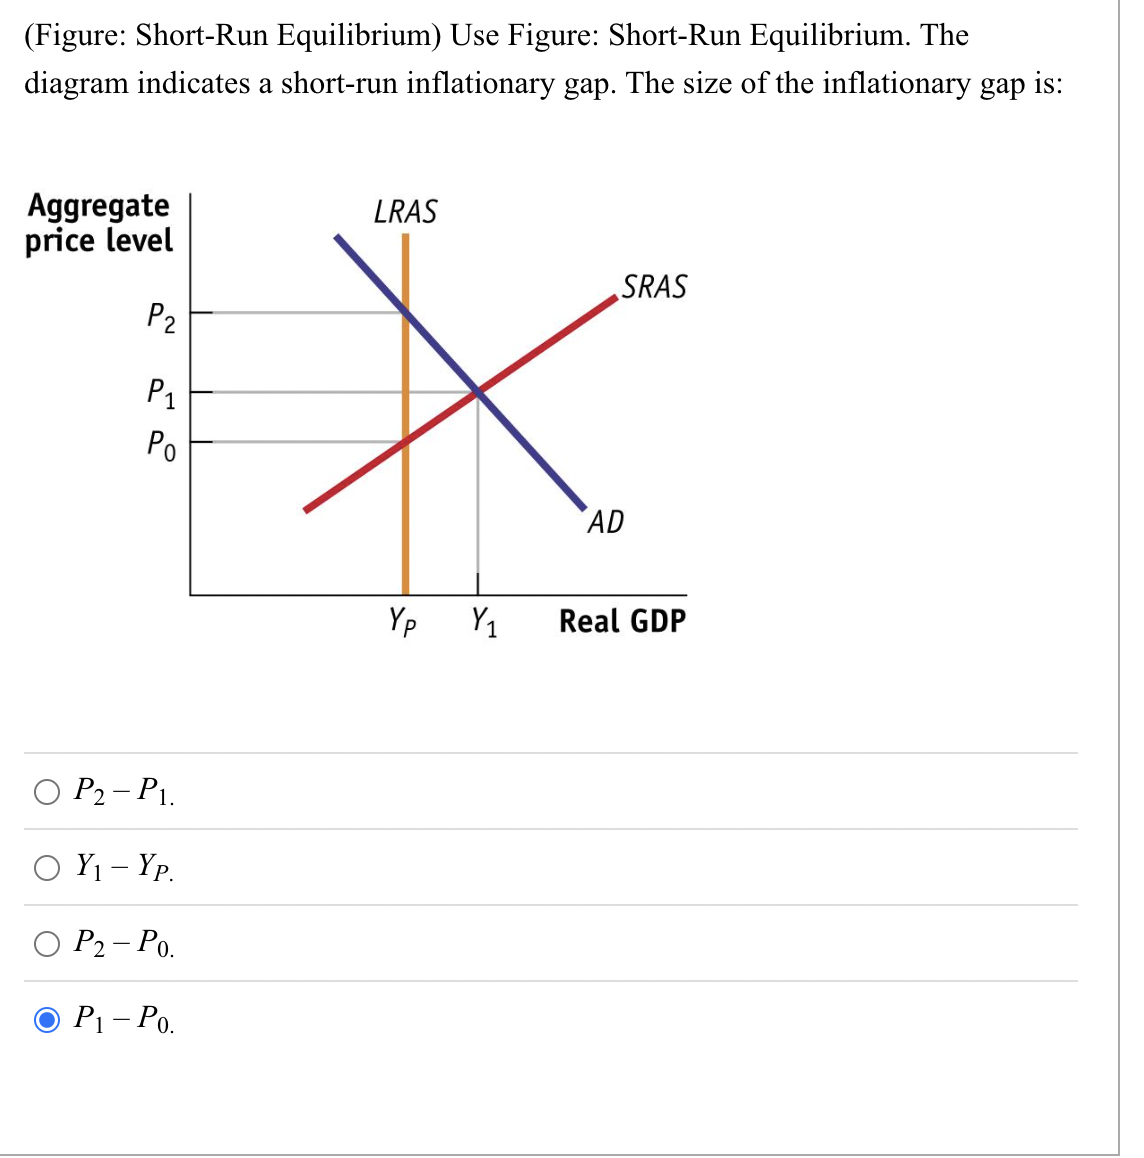 (Figure: Short-Run Equilibrium) Use Figure: Short-Run Equilibrium. The
diagram indicates a short-run inflationary gap. The size of the inflationary gap is:
Aggregate
price level
P₂
P₁
Po
P₂-P₁.
O Y₁ - YP.
P2 - Po.
O P₁-Po.
LRAS
Үр Y₁
SRAS
AD
Real GDP